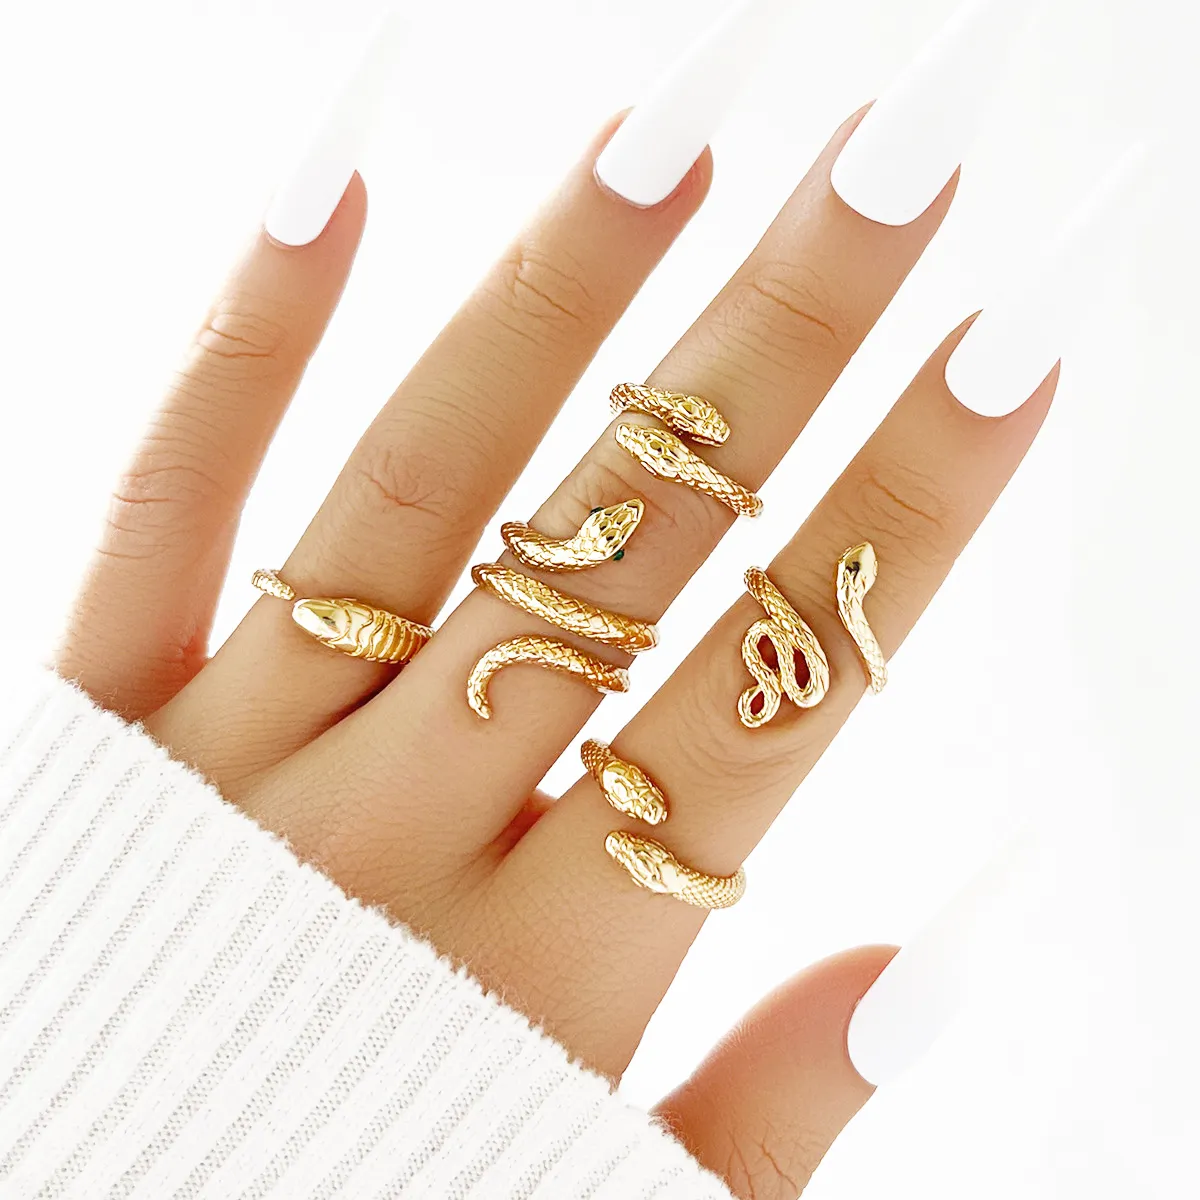 S2704 Fashion Jewelry Knuckle Ring Set Geometric Snakes Stacking Rings Midi Rings Sets 5pcs/set